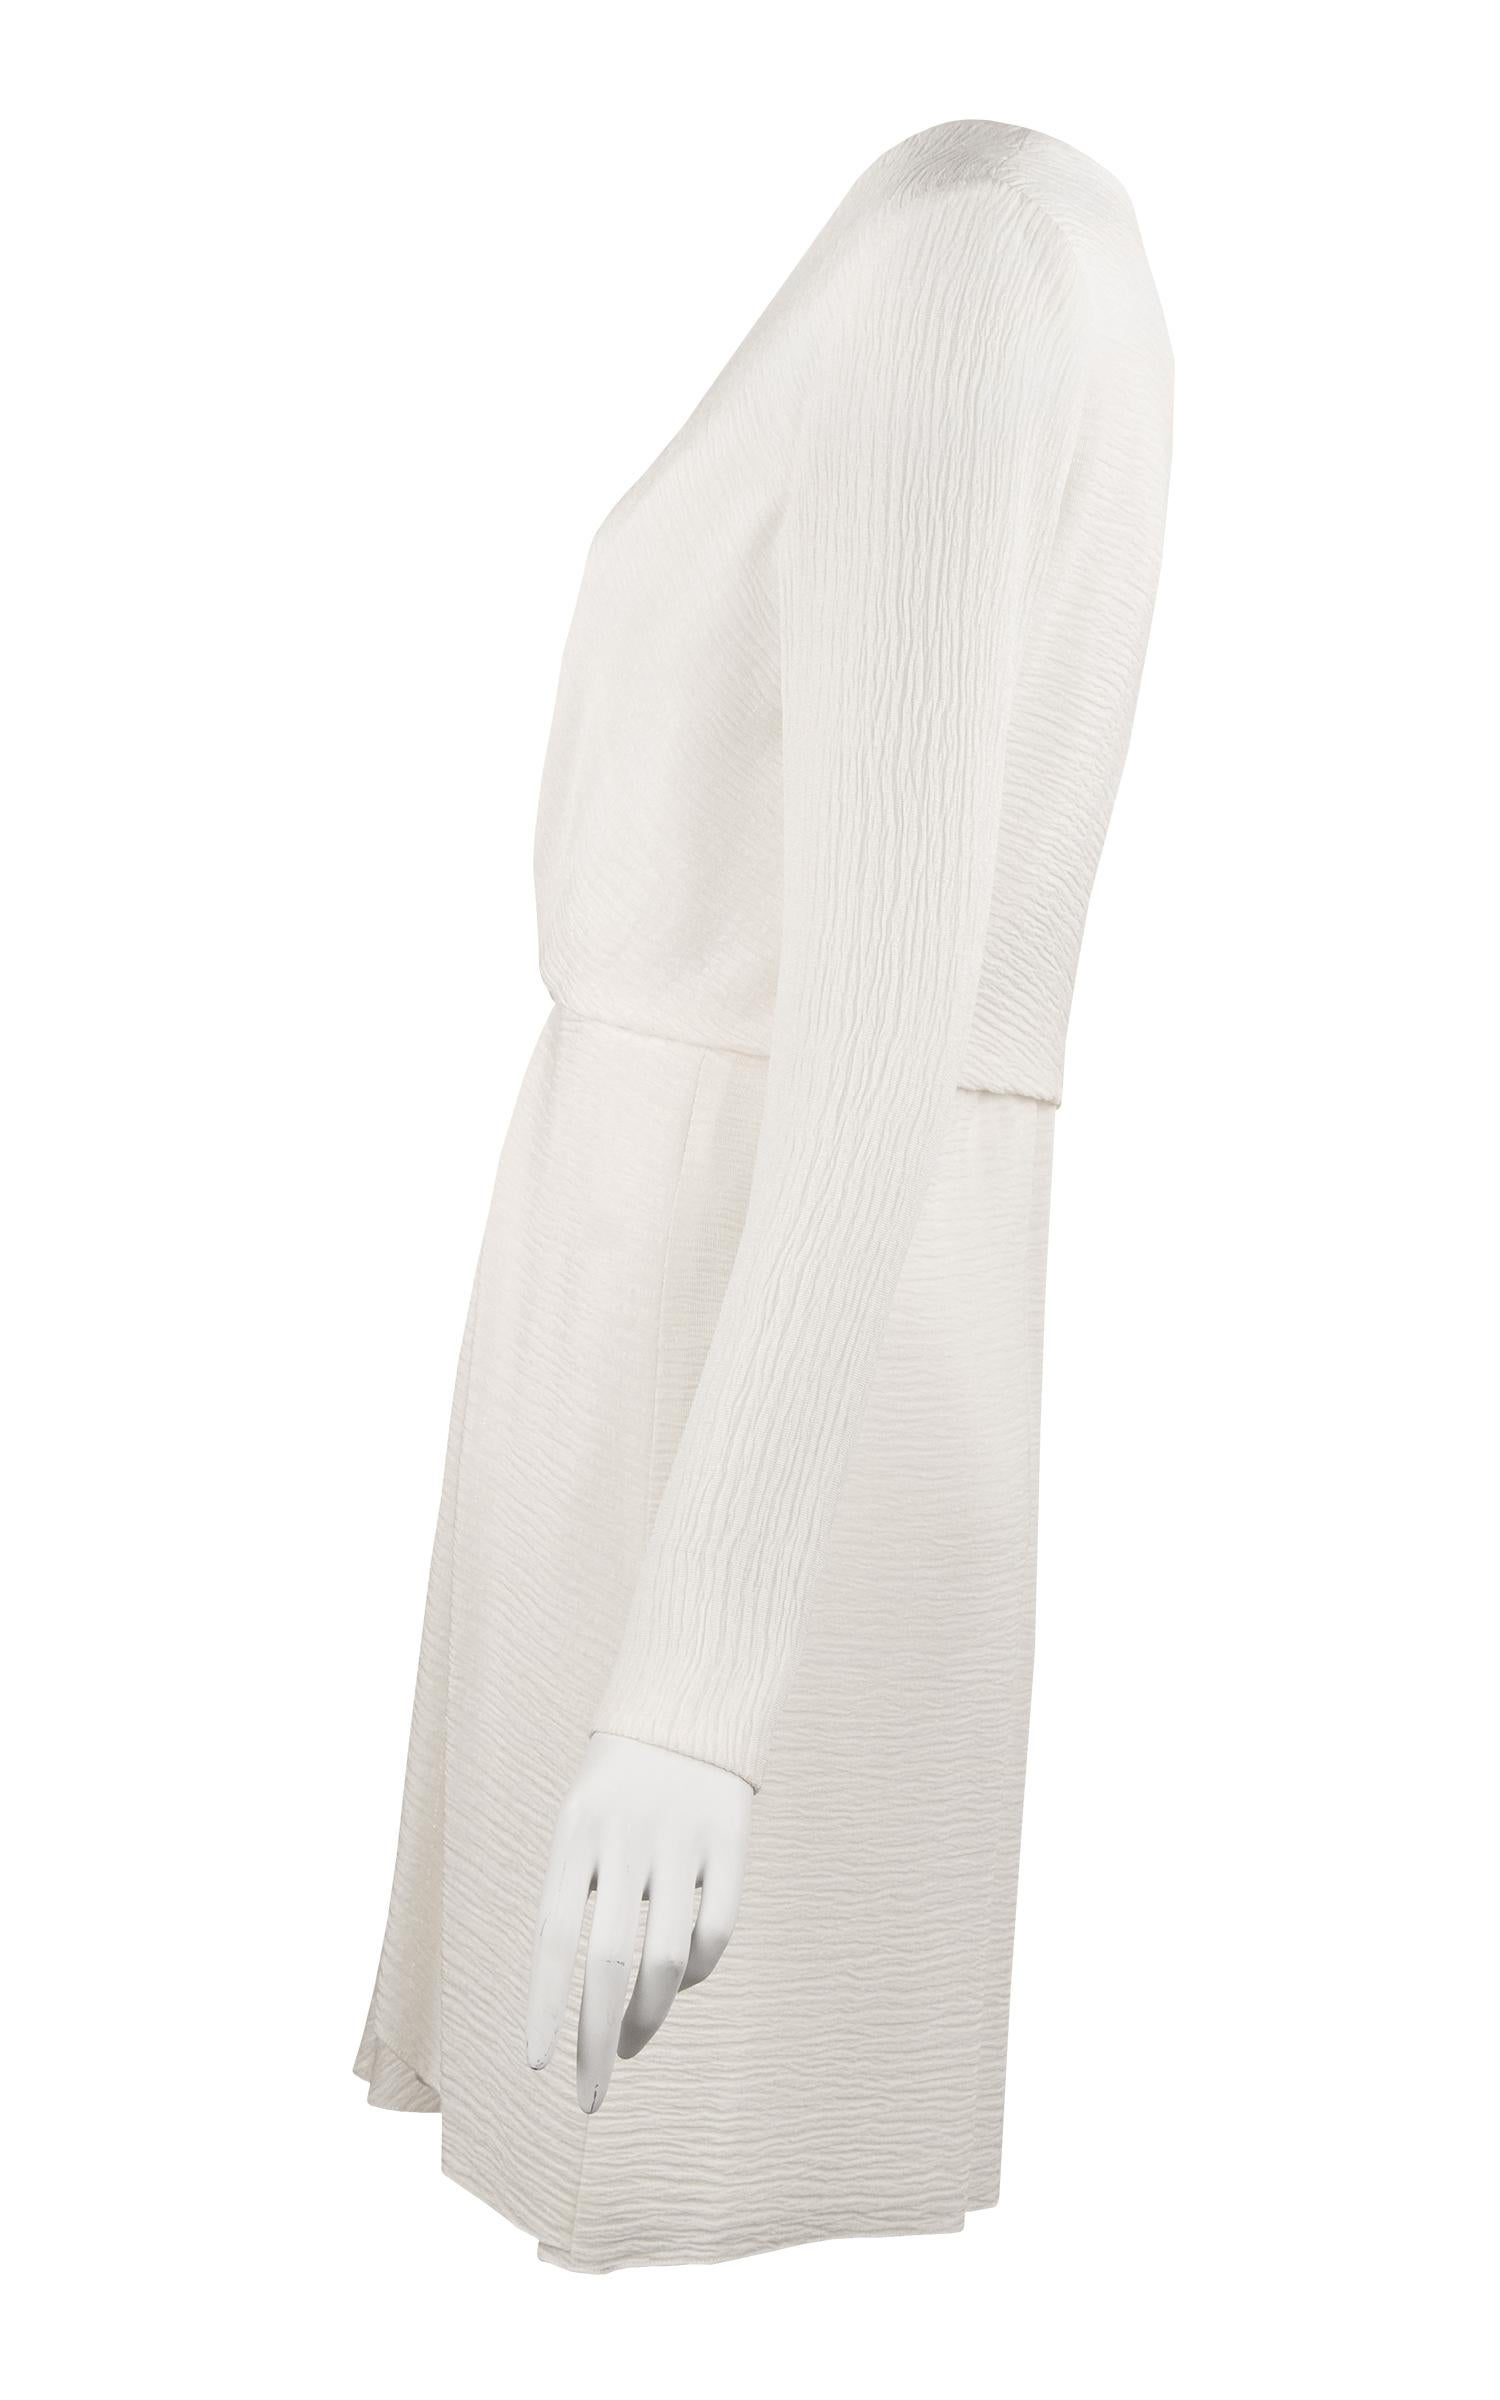 Clean and classic J. Mendel off white silk dress.  Incredible detail with a twist in the center front.  Features a v neck and long sleeves.

Size: US 4

Condition: Pristine, like new

Composition: 51% silk, 49% acetate / lining 100% silk

Made in